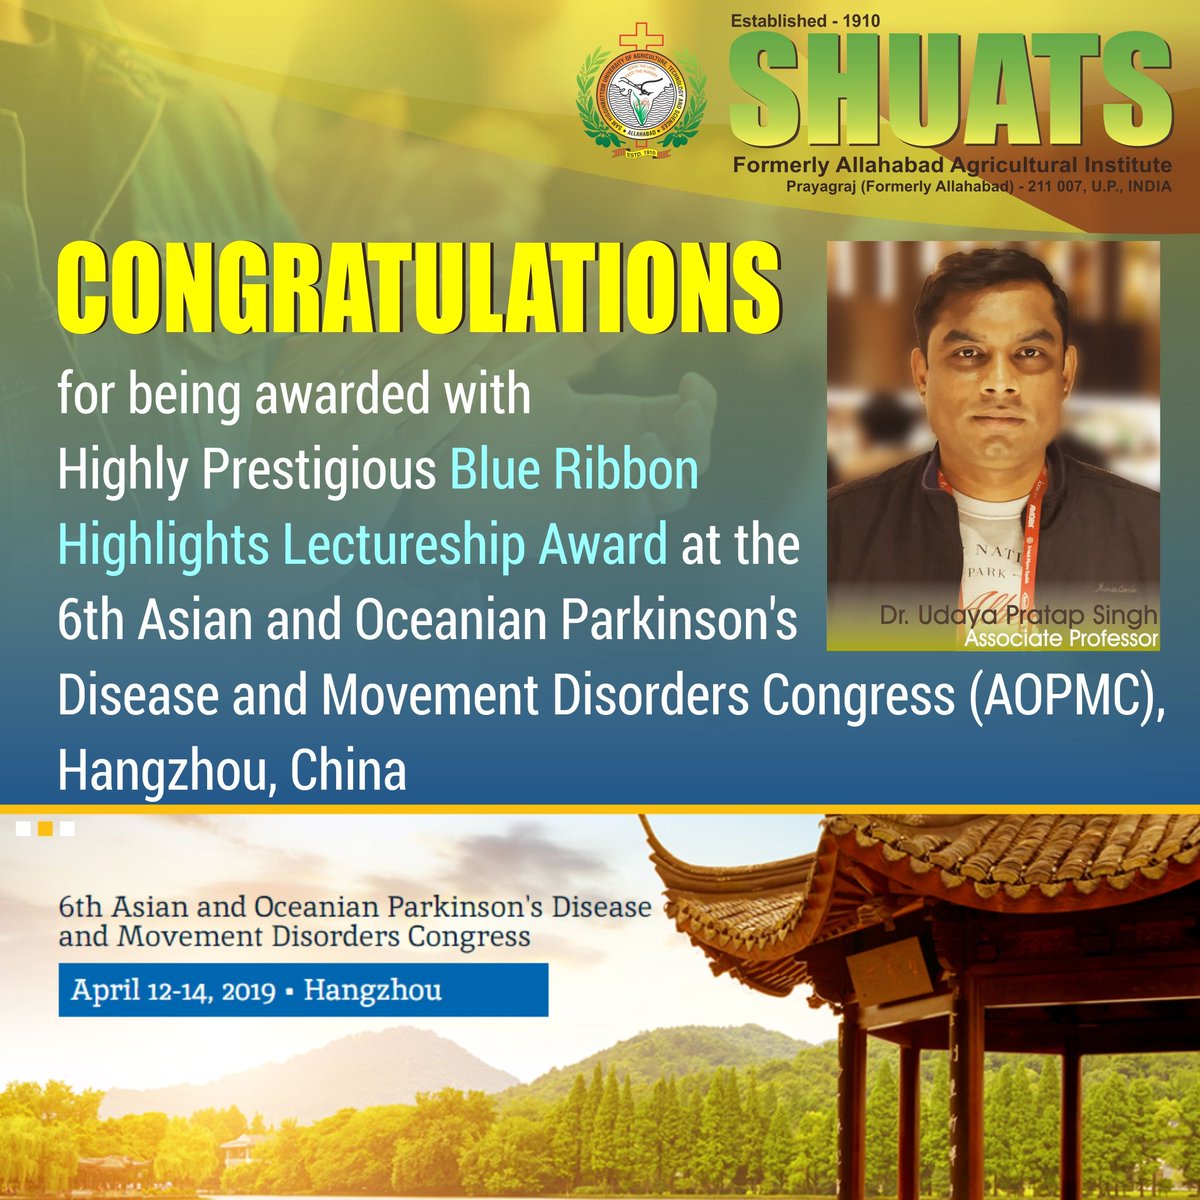 We are pleased to share that, Dr. Uday Singh, Associate Professor, Department of Pharmaceutical Science, has been awarded with Highly Prestigious Blue Ribbon Highlights Lectureship Award at the 6th Asian and Oceanian Parkinson's Disease and Movement Disorders Congress (AOPMC).